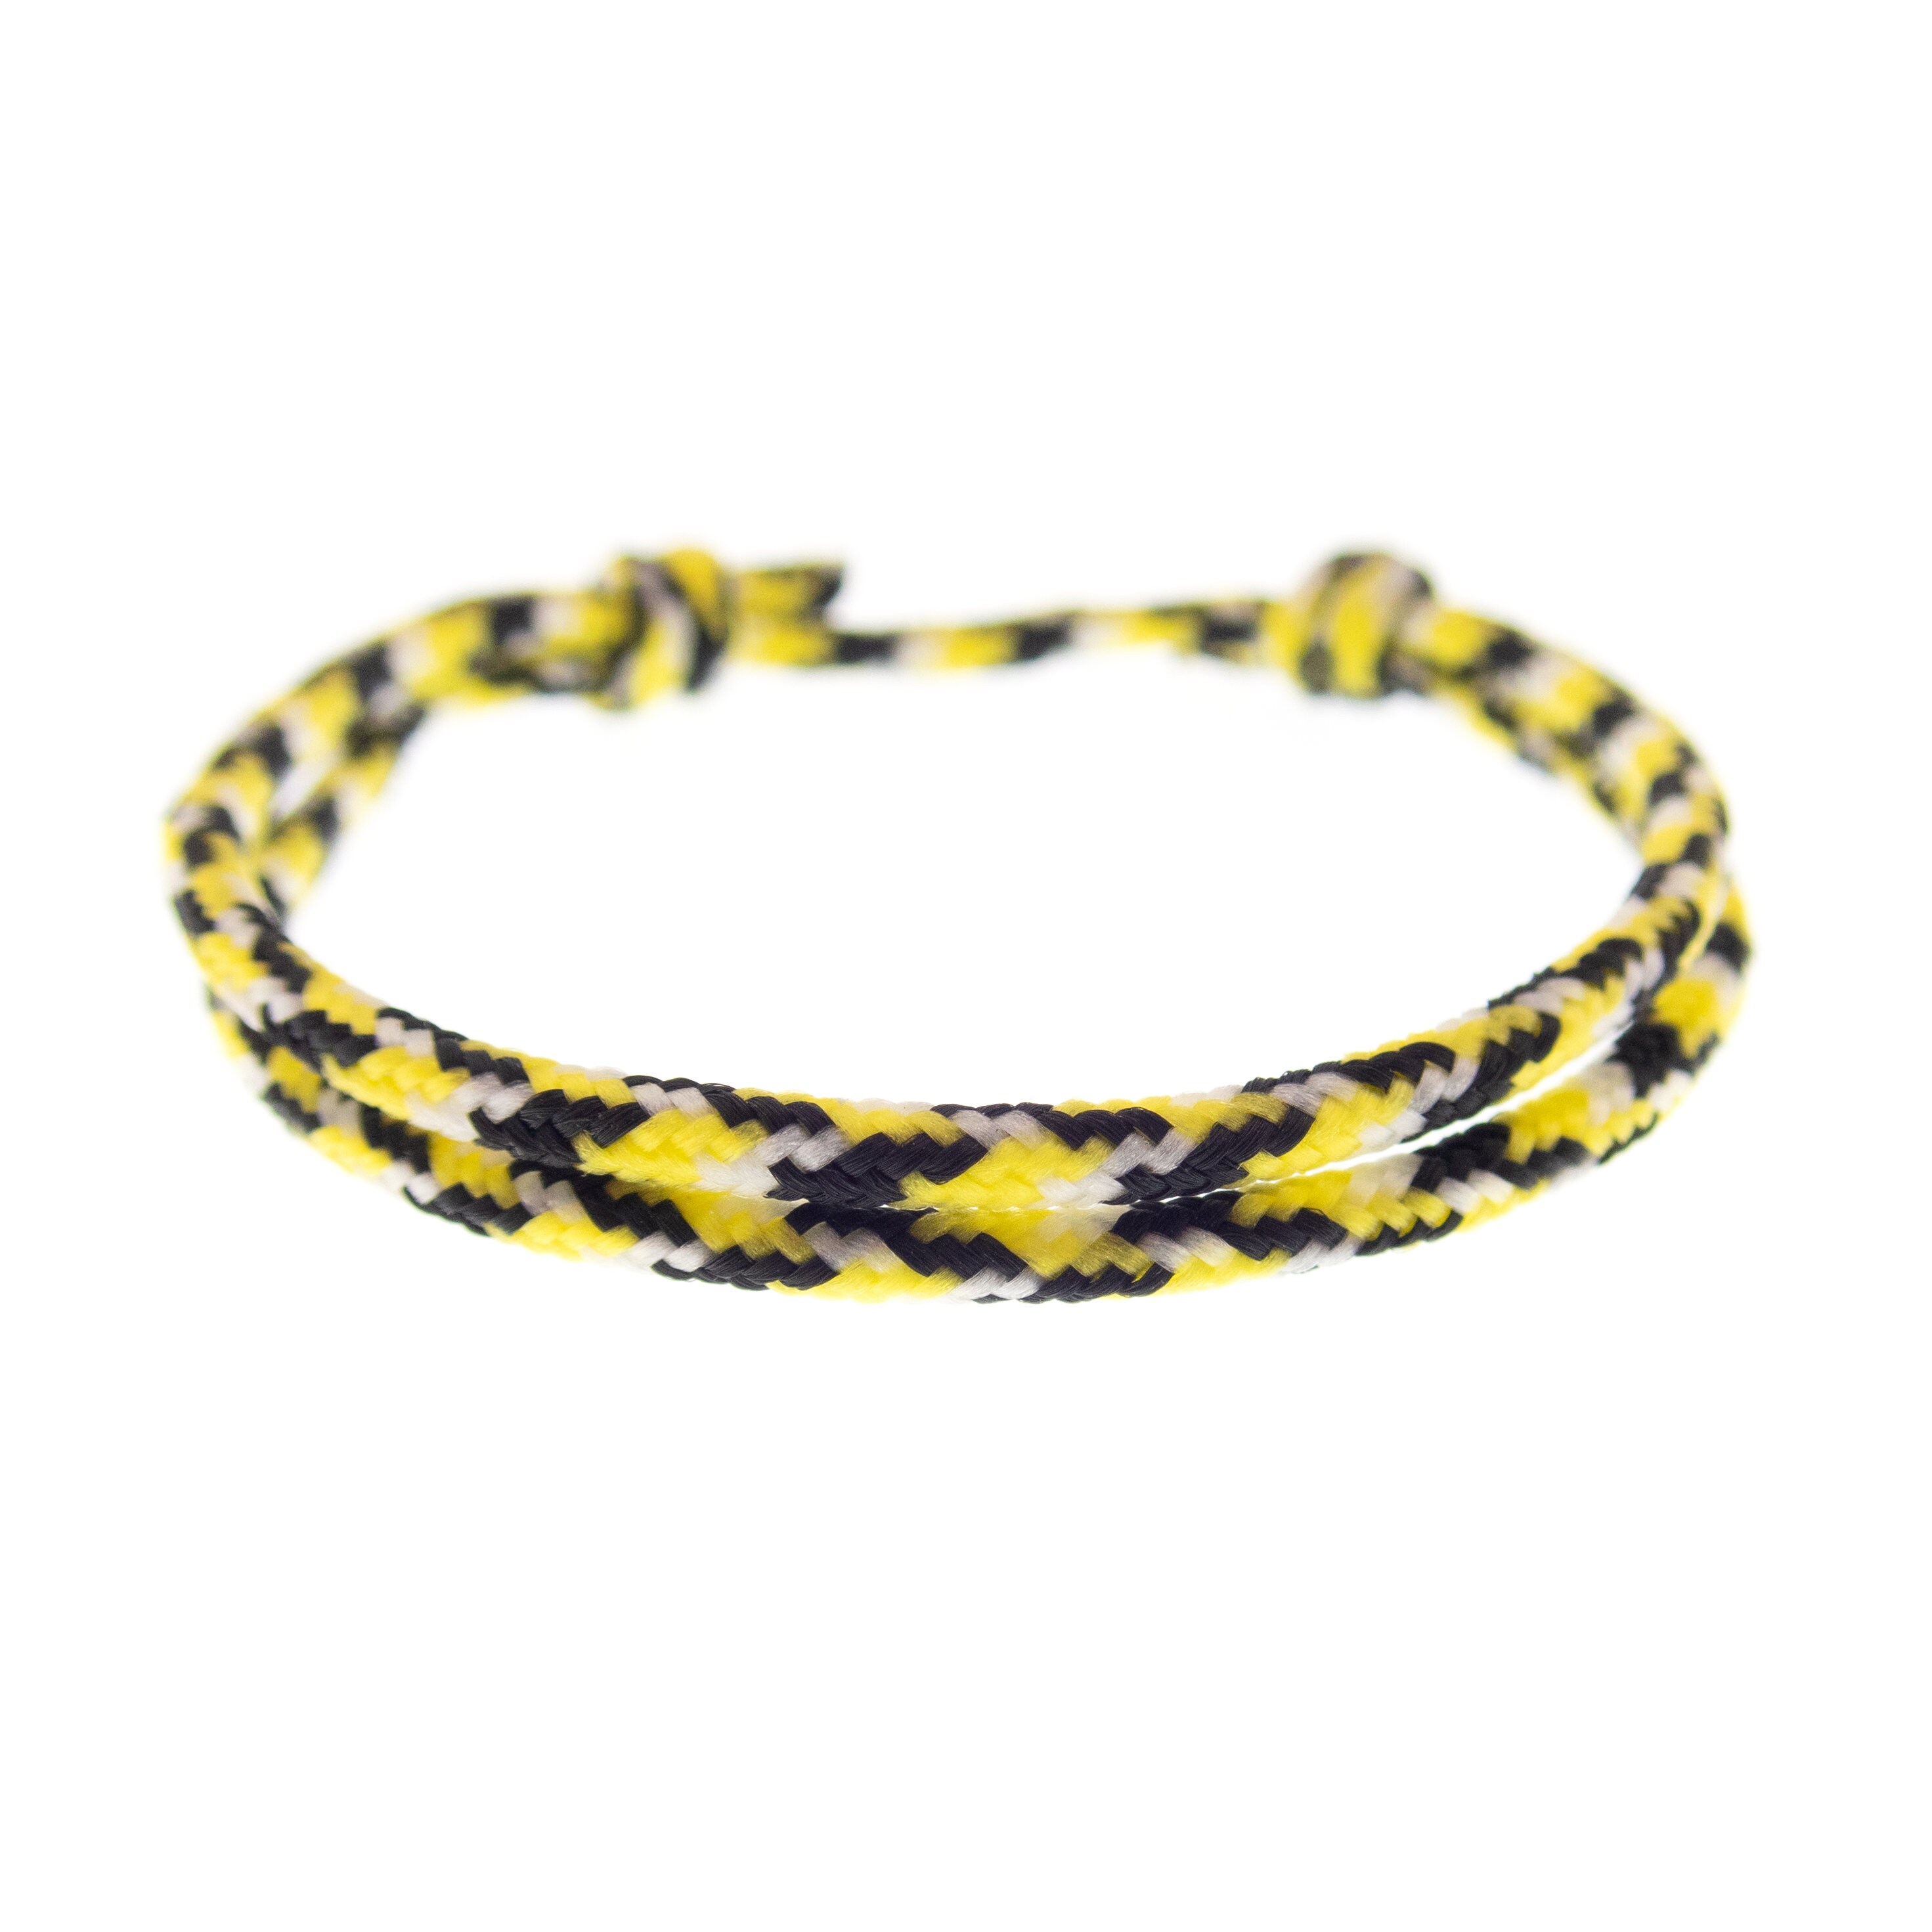 Mens Sailing Rope Bracelets. Nautical Rope Bracelet Handmade. Navy  Adjustable String Jewelry in Yellow & Black for Guys Ladies Couples. 2mm